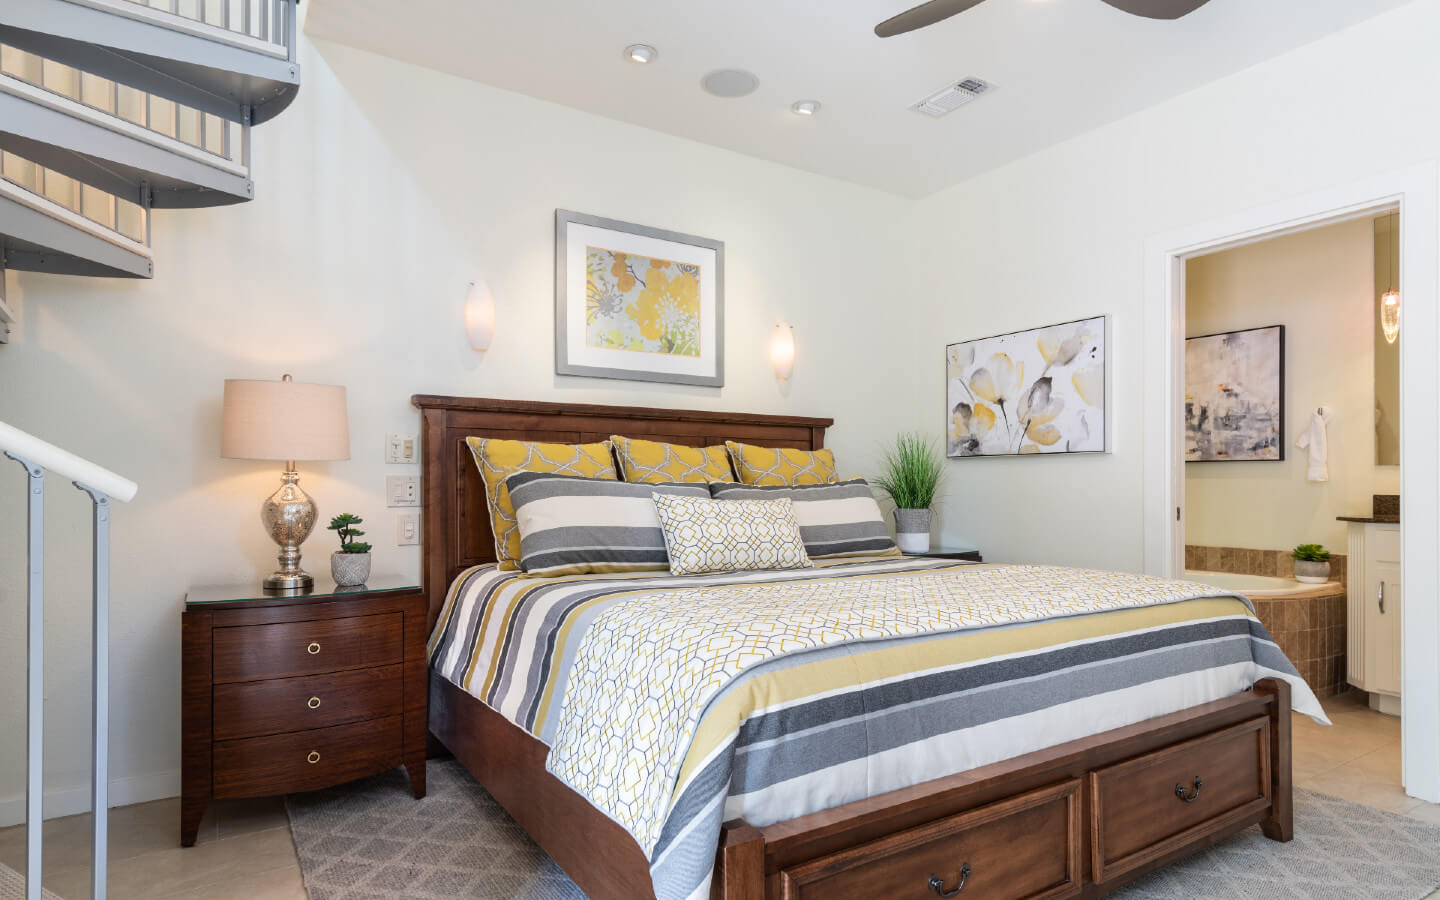 Queen storage bed with two end tables, a ceiling fan, and metal spiral staircase 